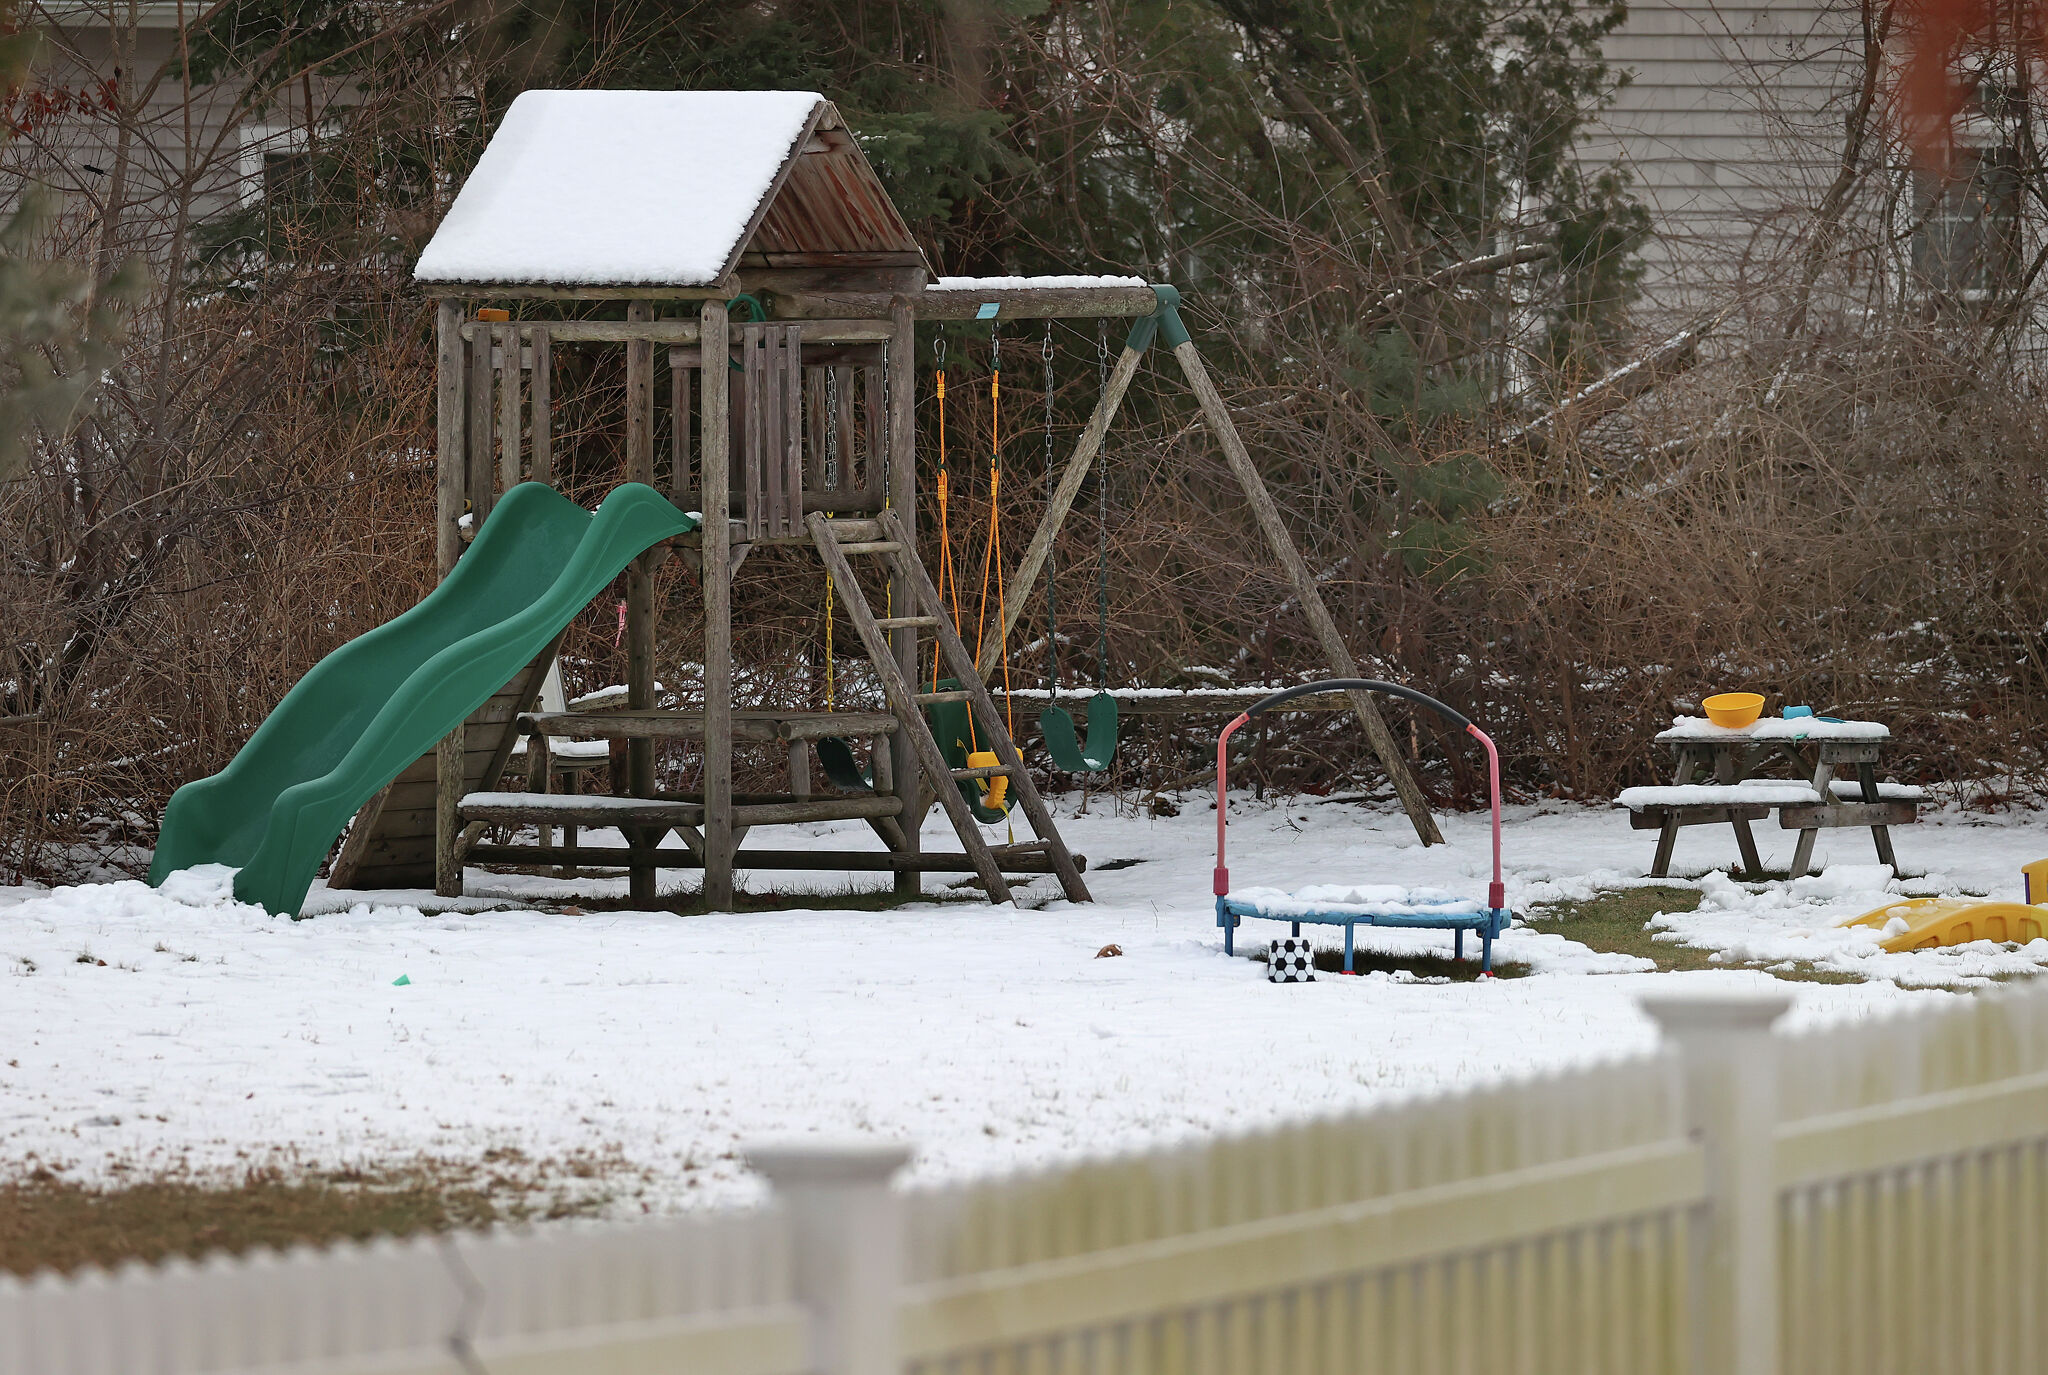 Duxbury, MA - January 25: A playground set at 47 Summer Street. Duxbury police and fire were called to the home by a man who reported that a woman had jumped out of a window at the residence. Police discovered the bodies of two deceased children in the house. (Photo by David L. Ryan/The Boston Globe via Getty Images)